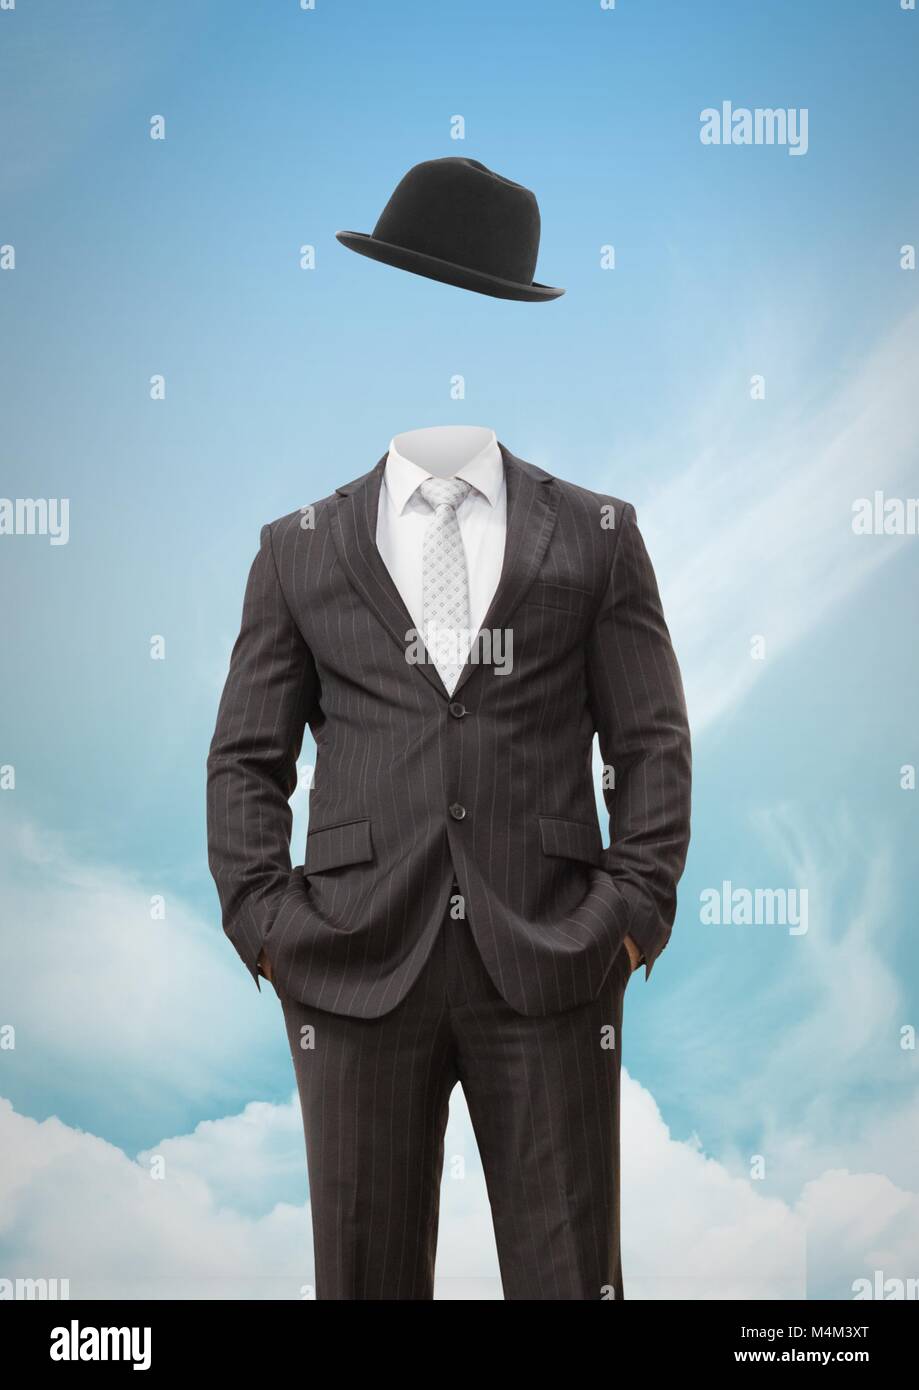 Headless man with surreal floating hat in front of sky Stock Photo - Alamy